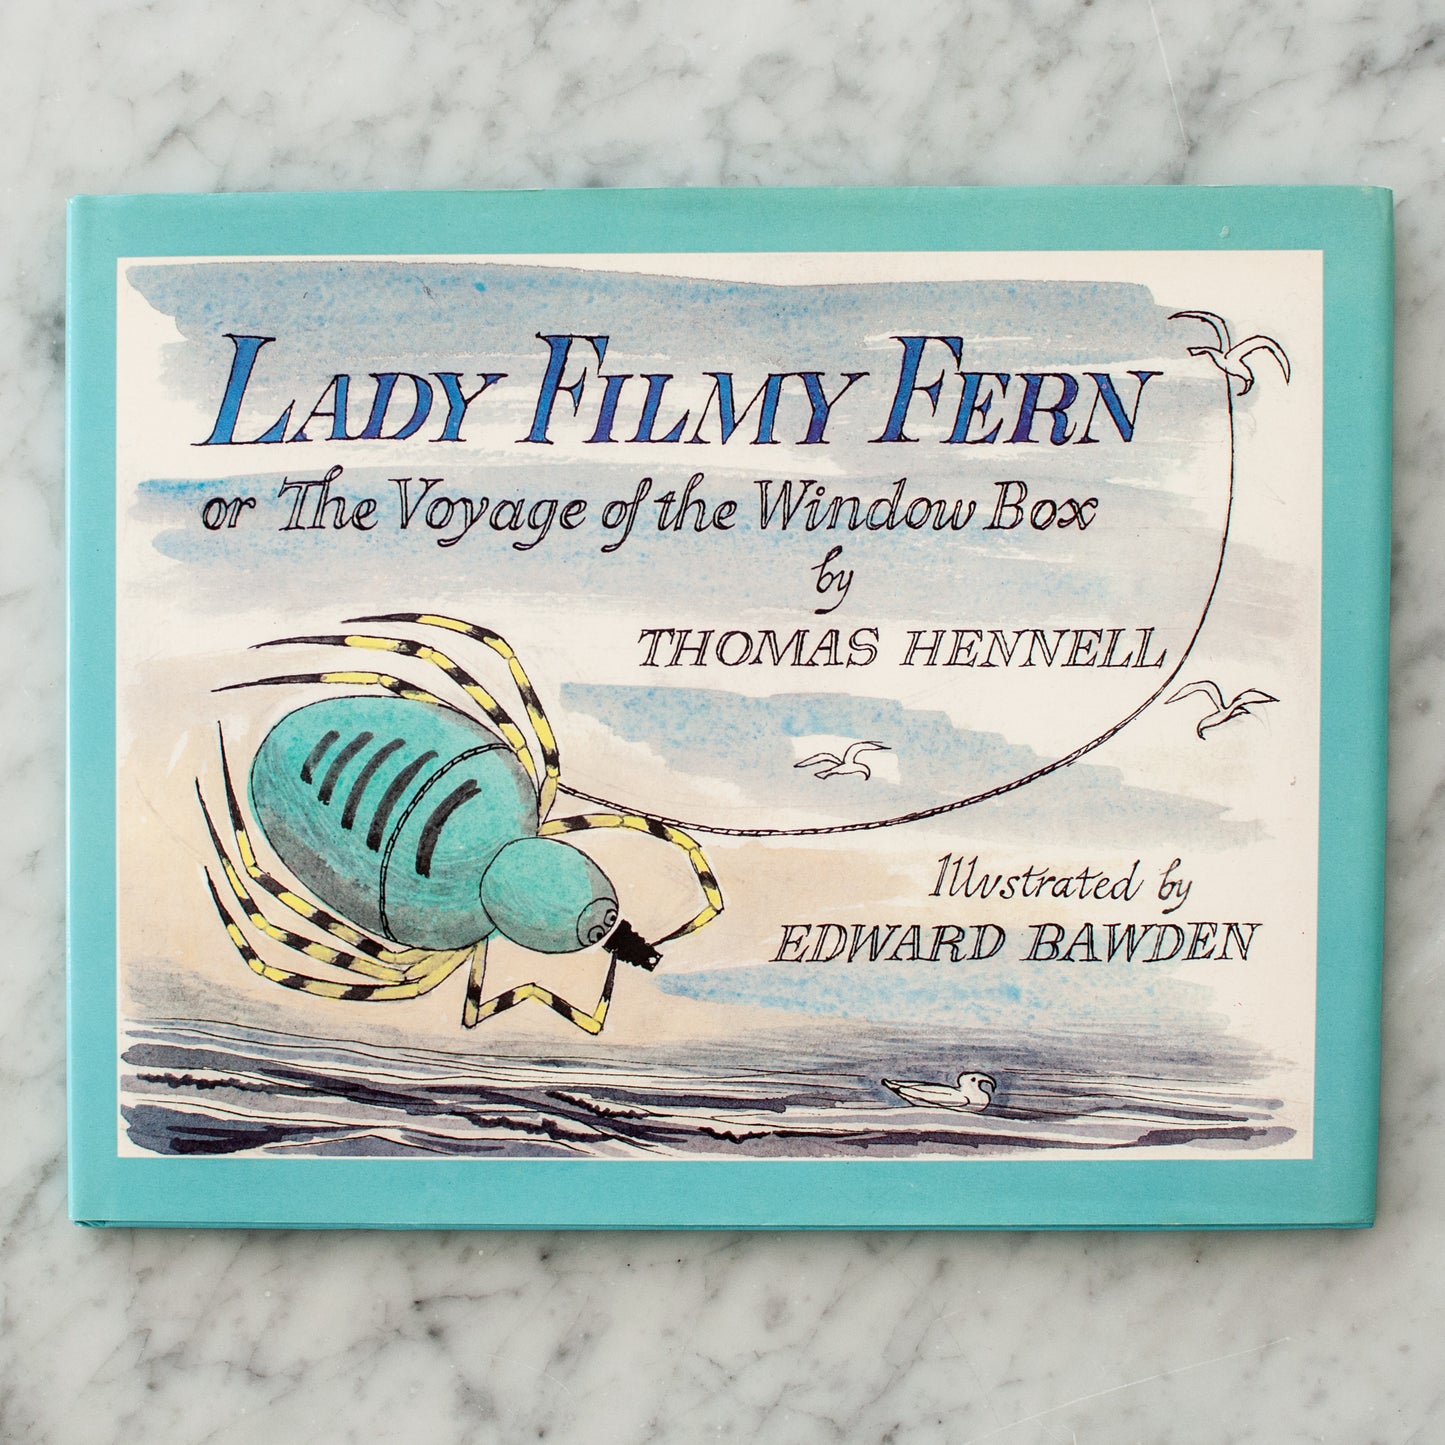 Lady Filmy Fern or The Voyage of the Window Box, 1980